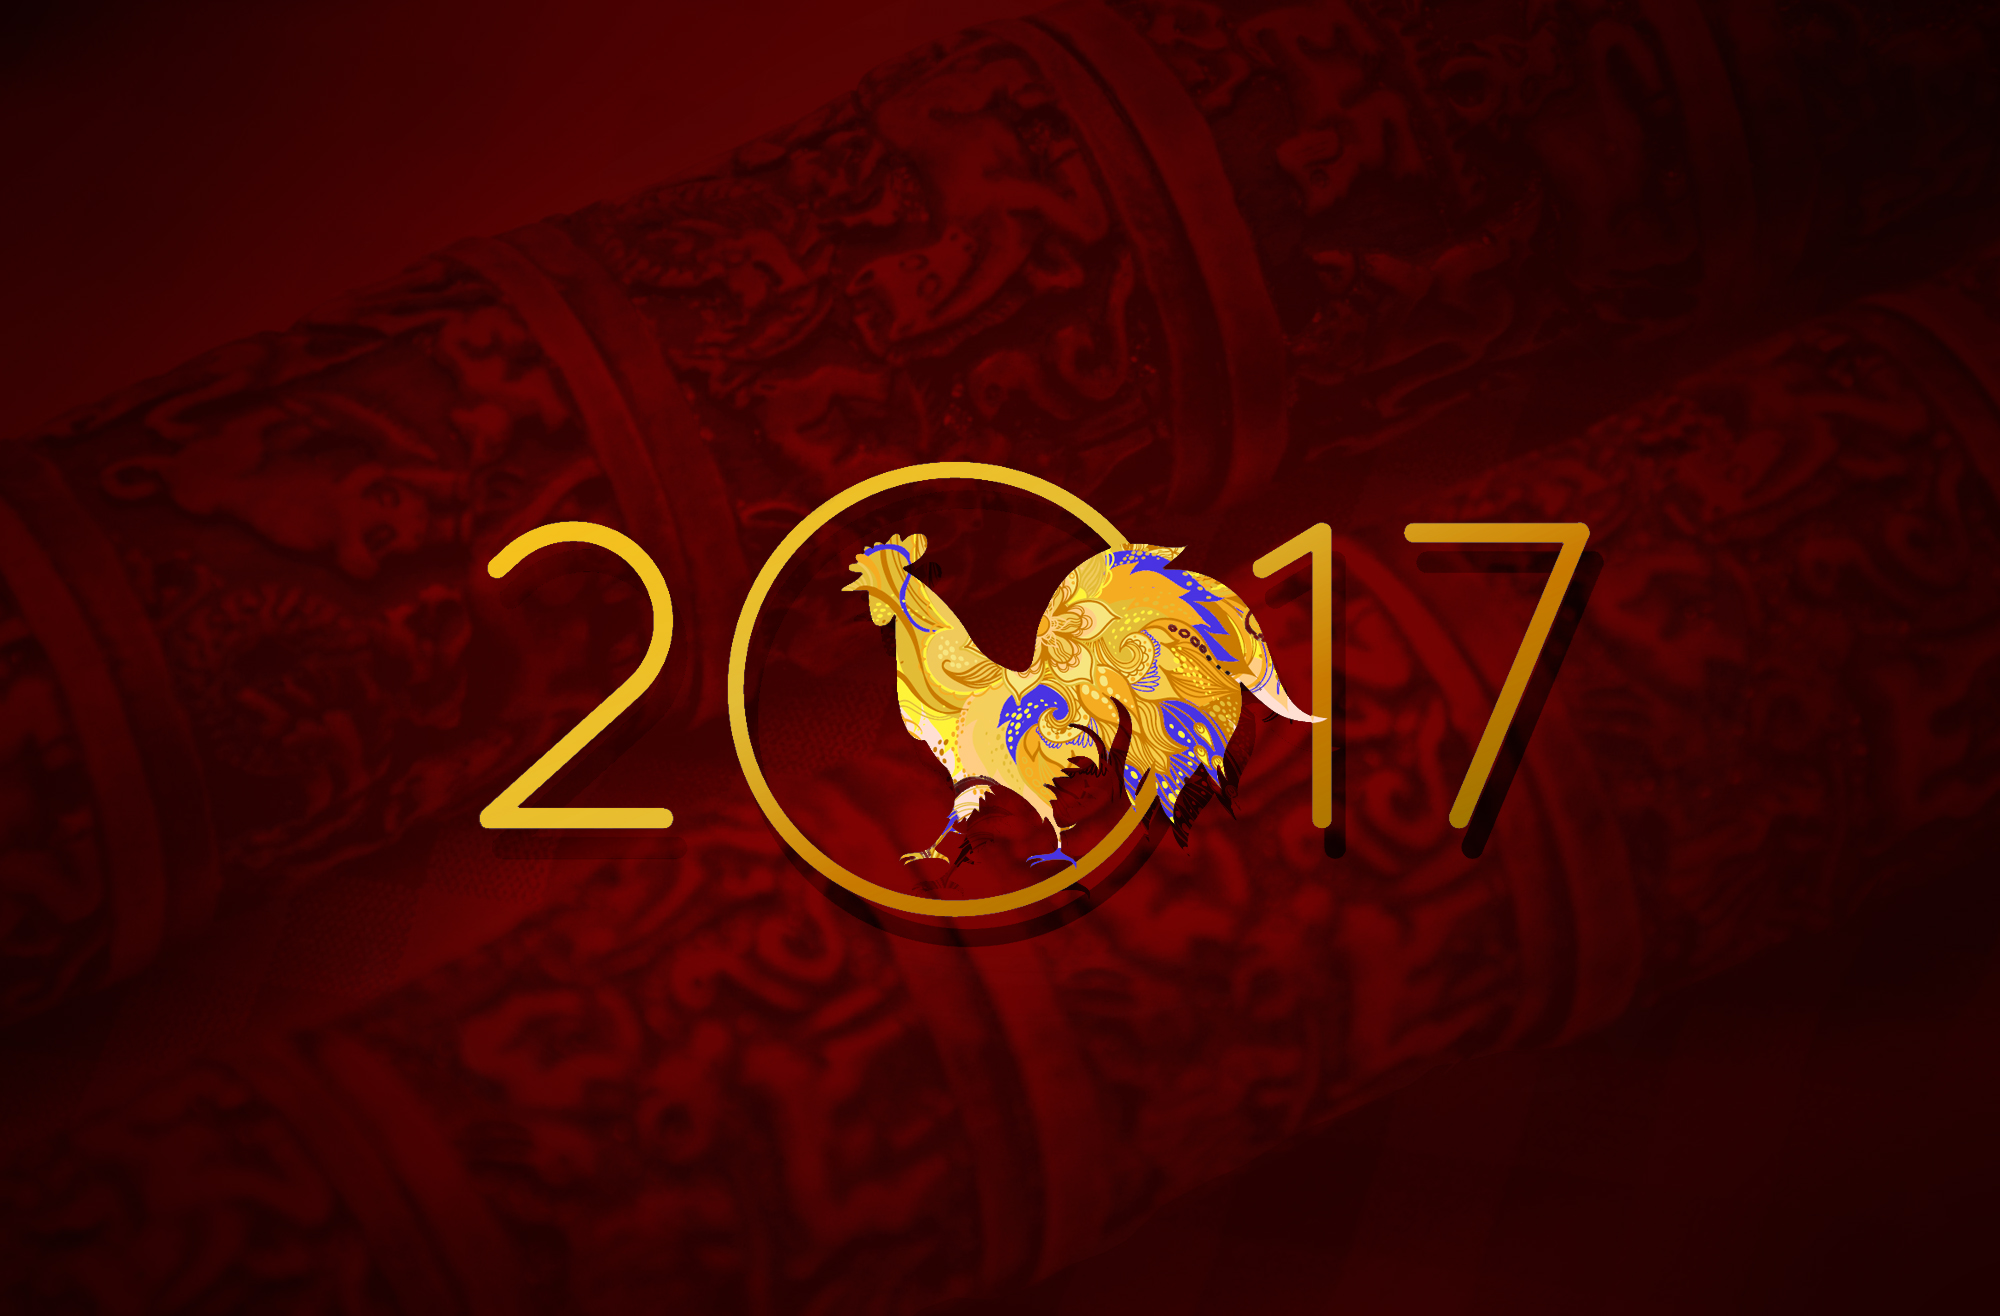 Year of the Rooster - Celebration of Chinese New Year